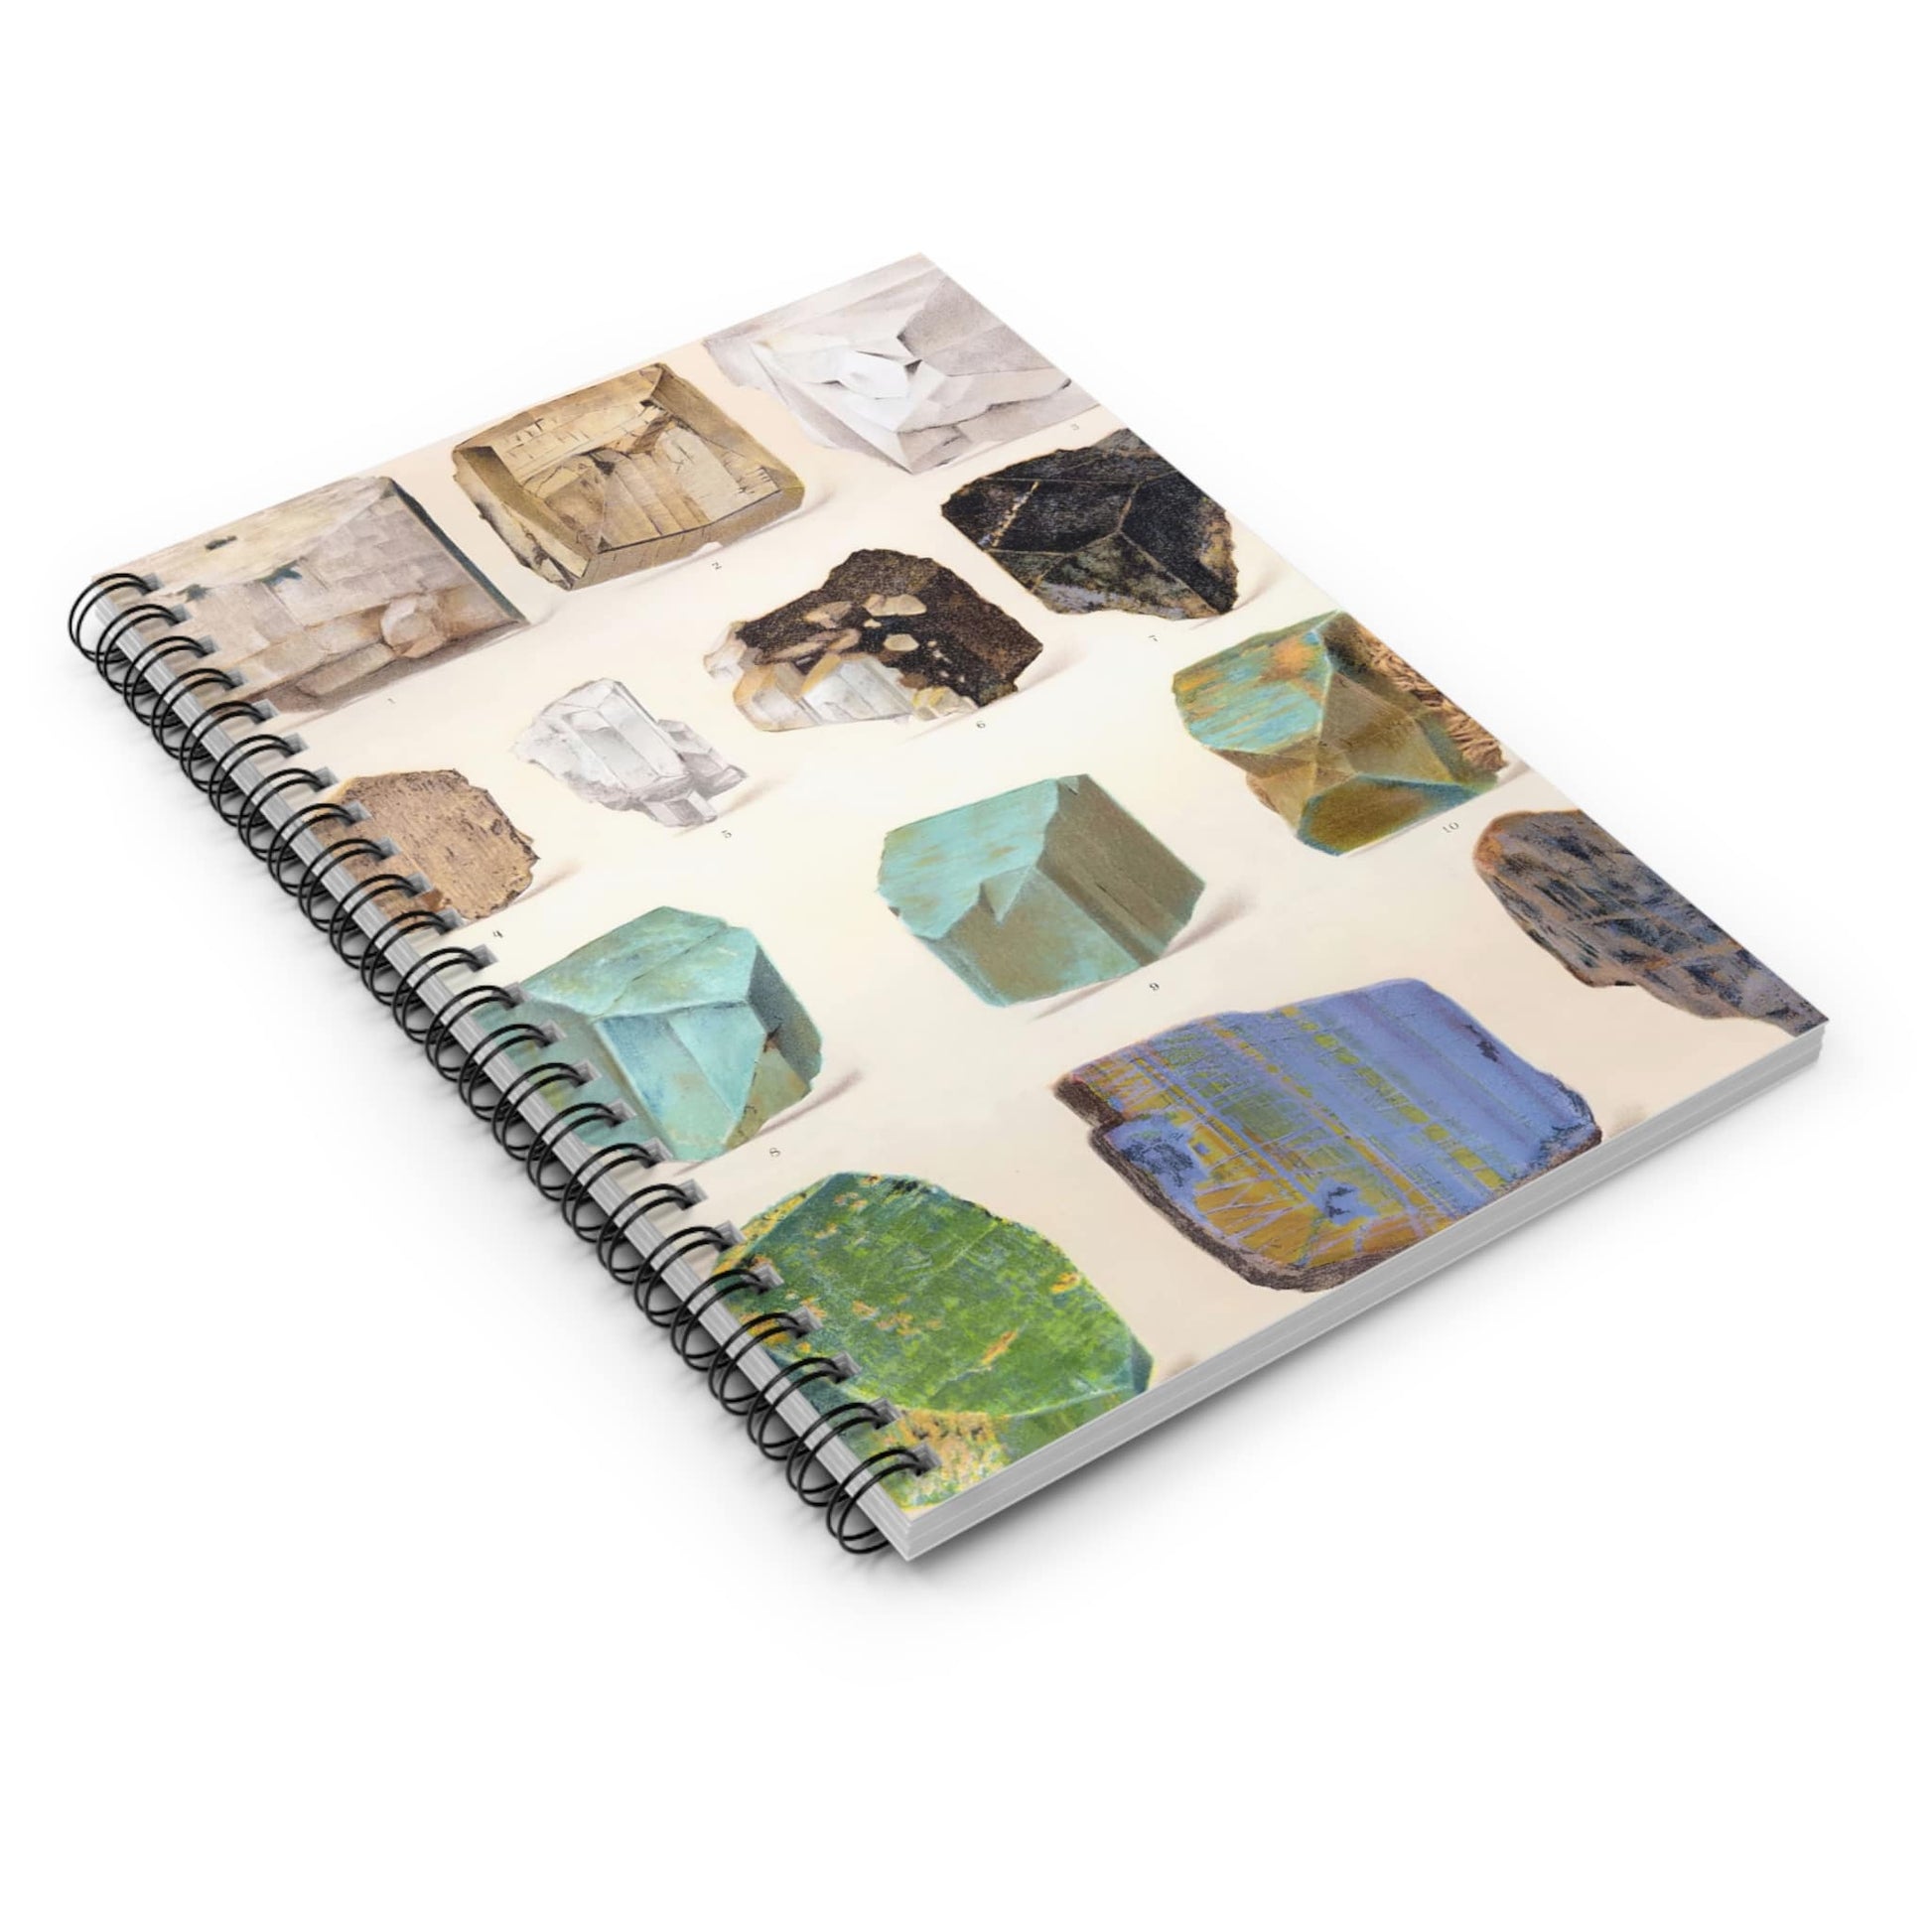 Raw Crystals and Gemstones Spiral Notebook Laying Flat on White Surface